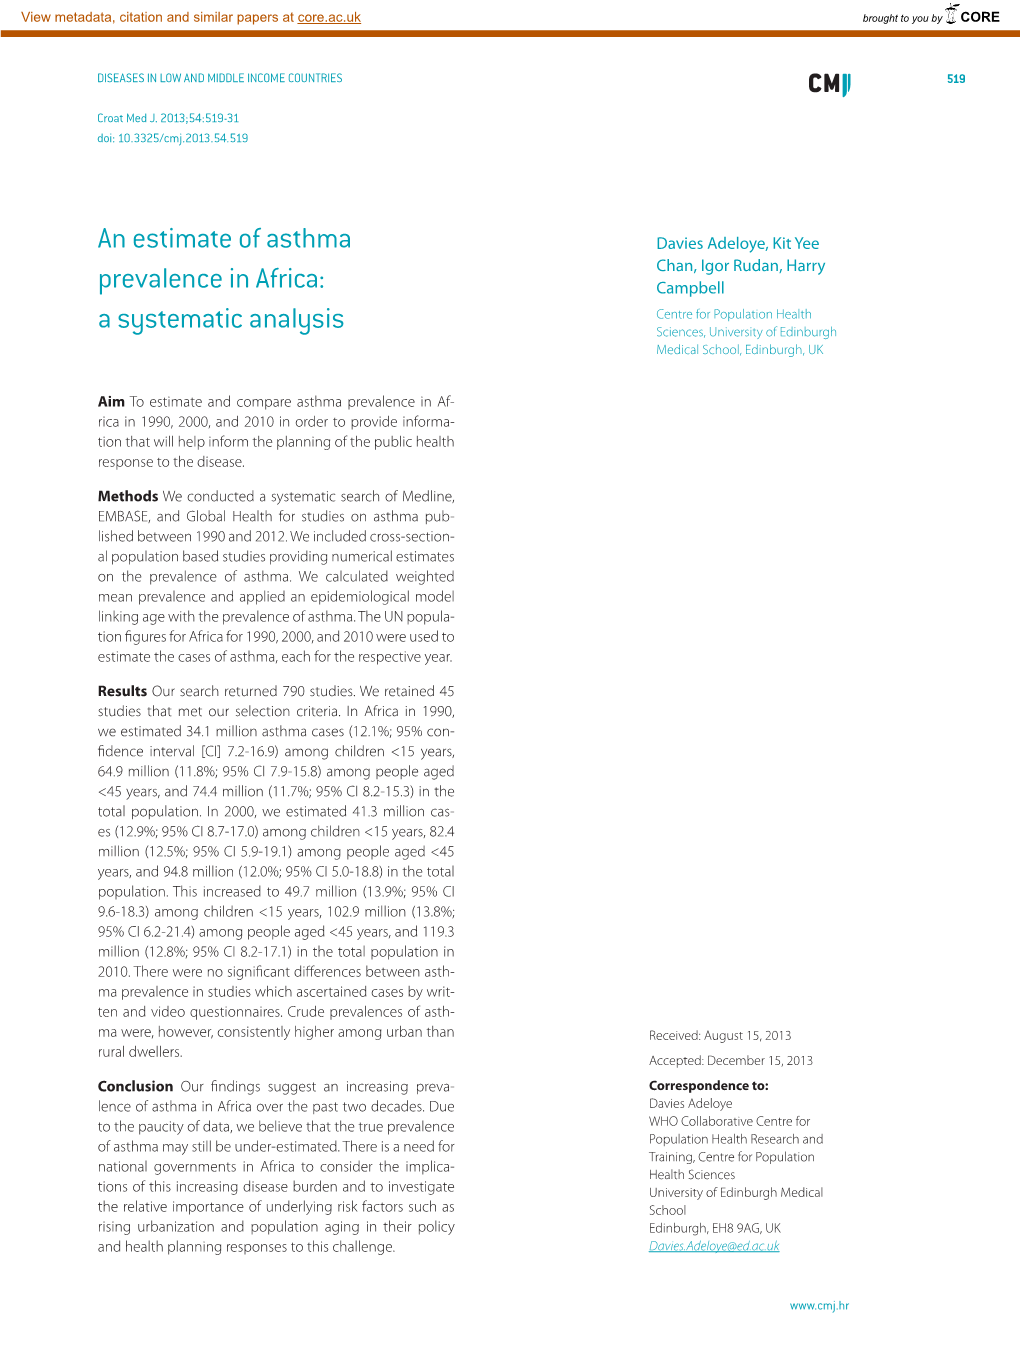 An Estimate of Asthma Prevalence in Africa: a Systematic Analysis 521